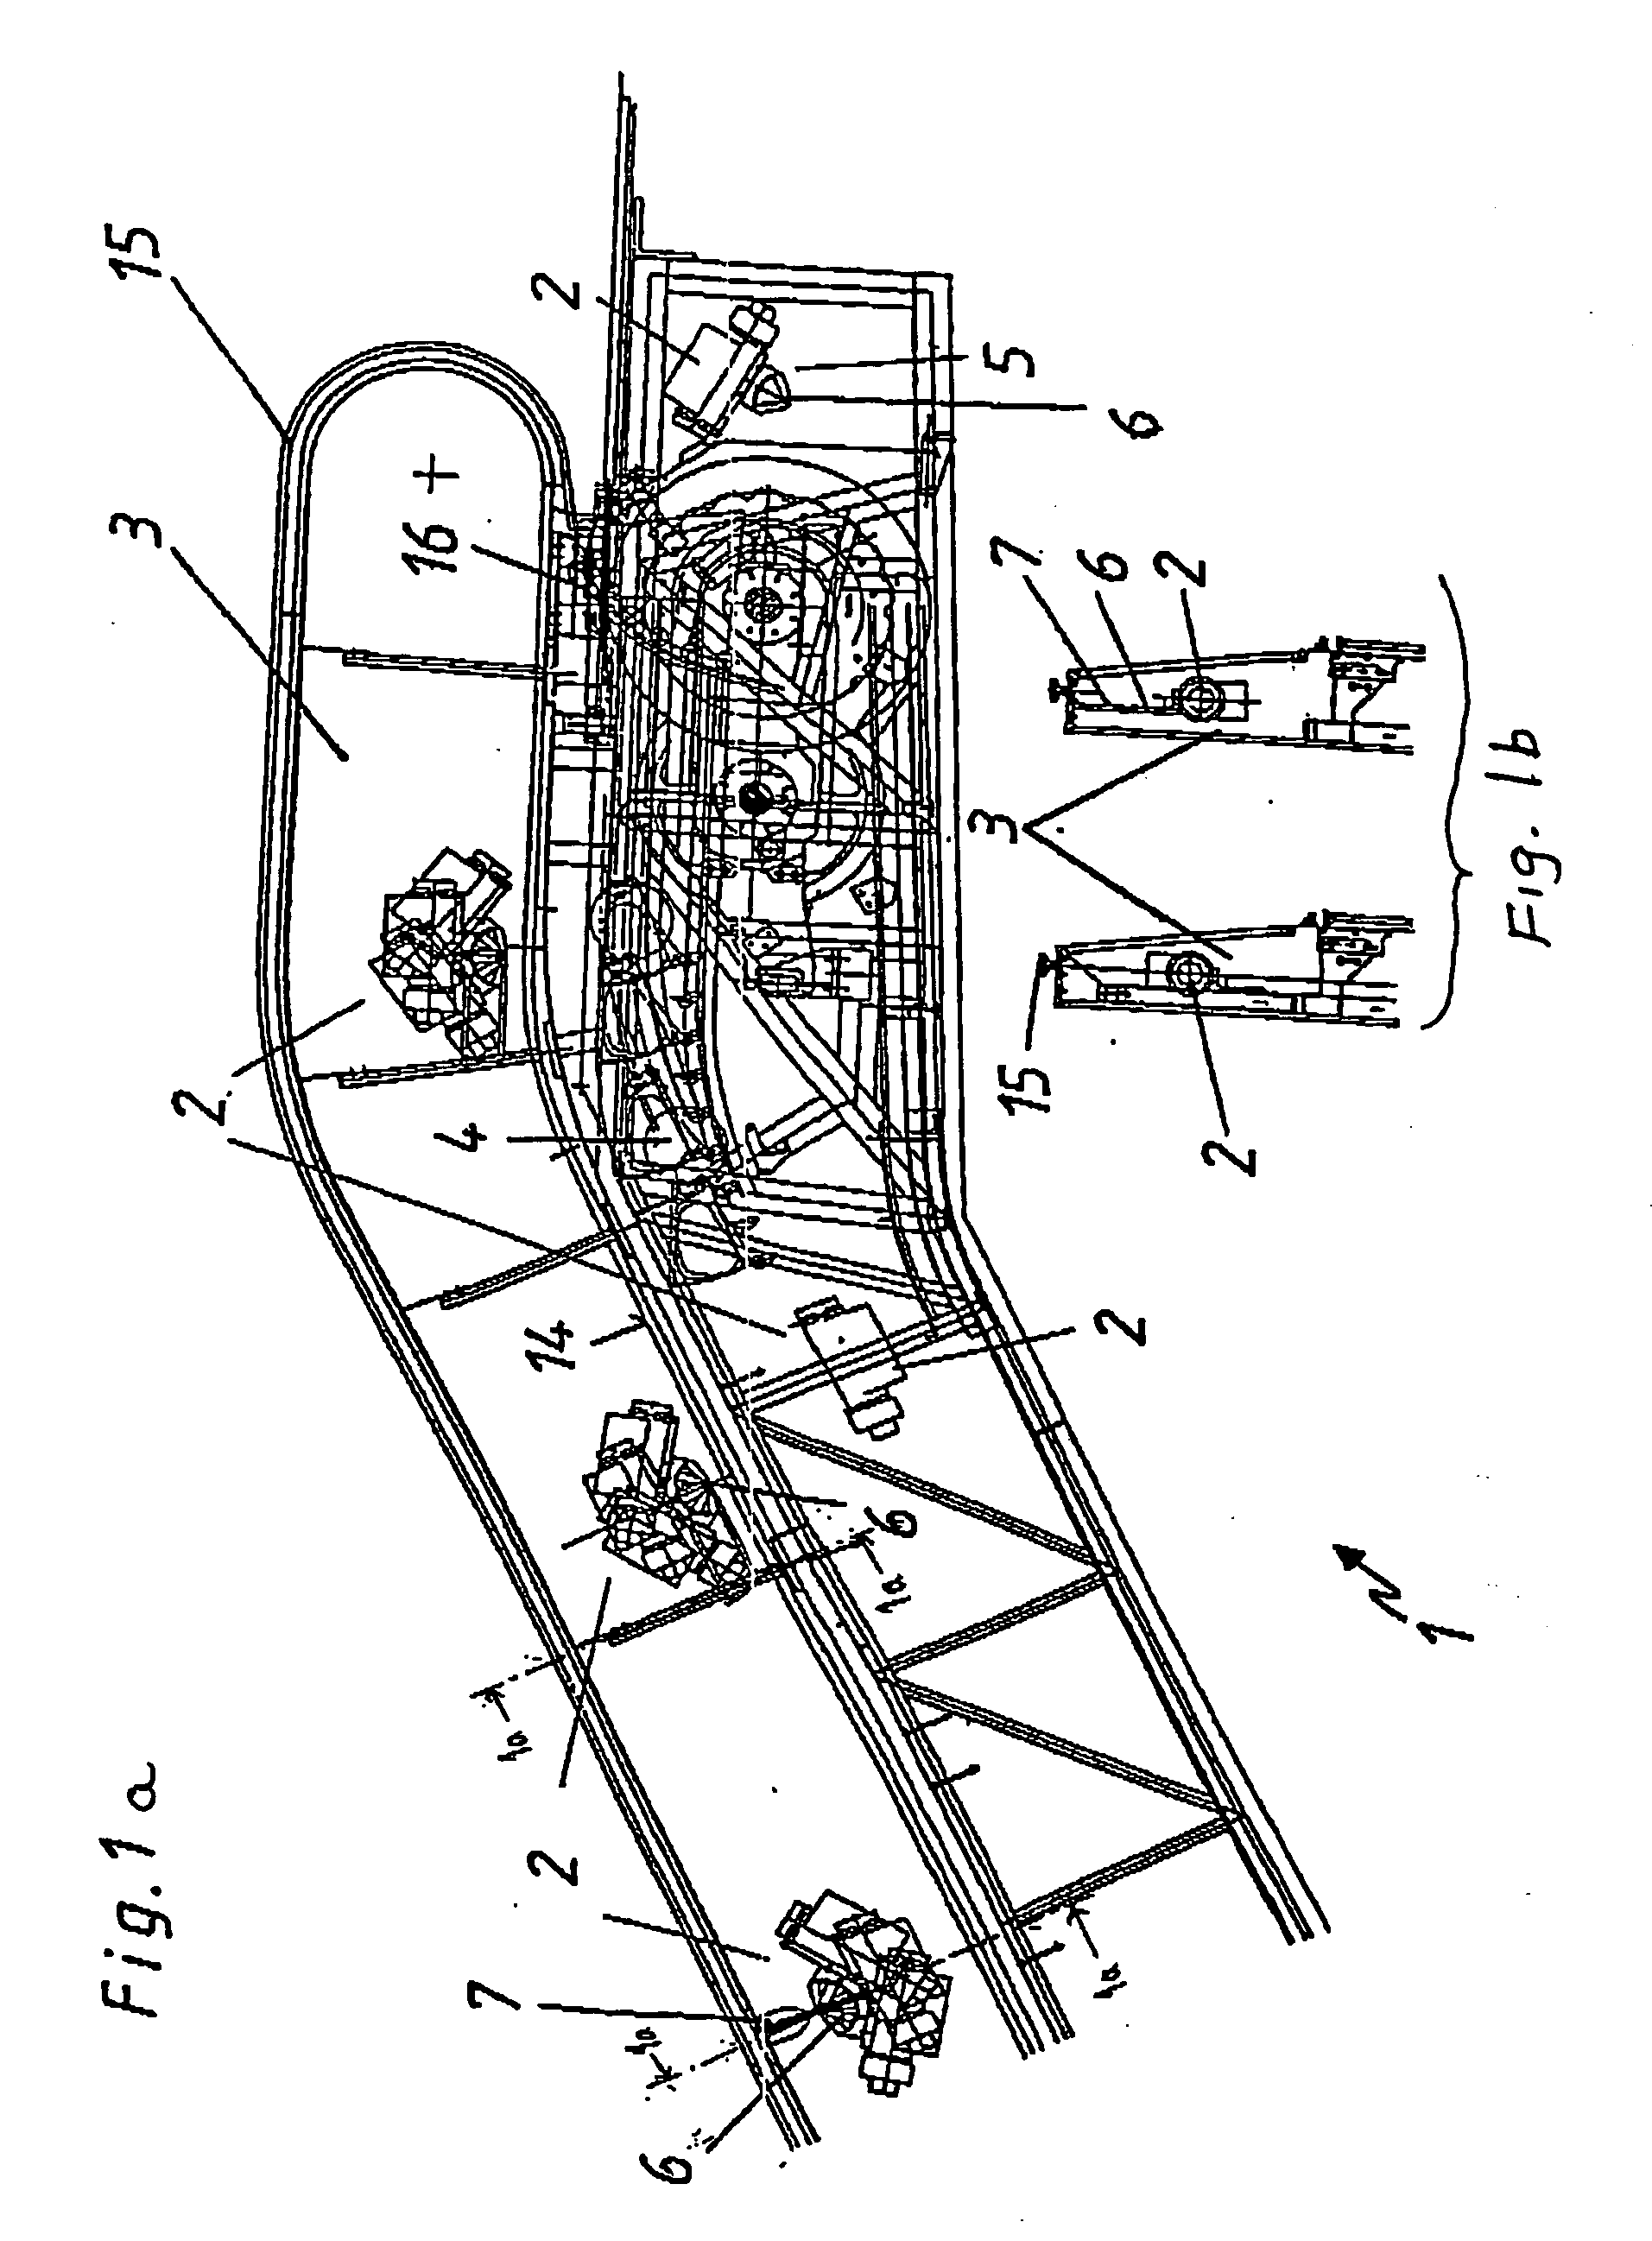 Device for heating escalators or moving walkways